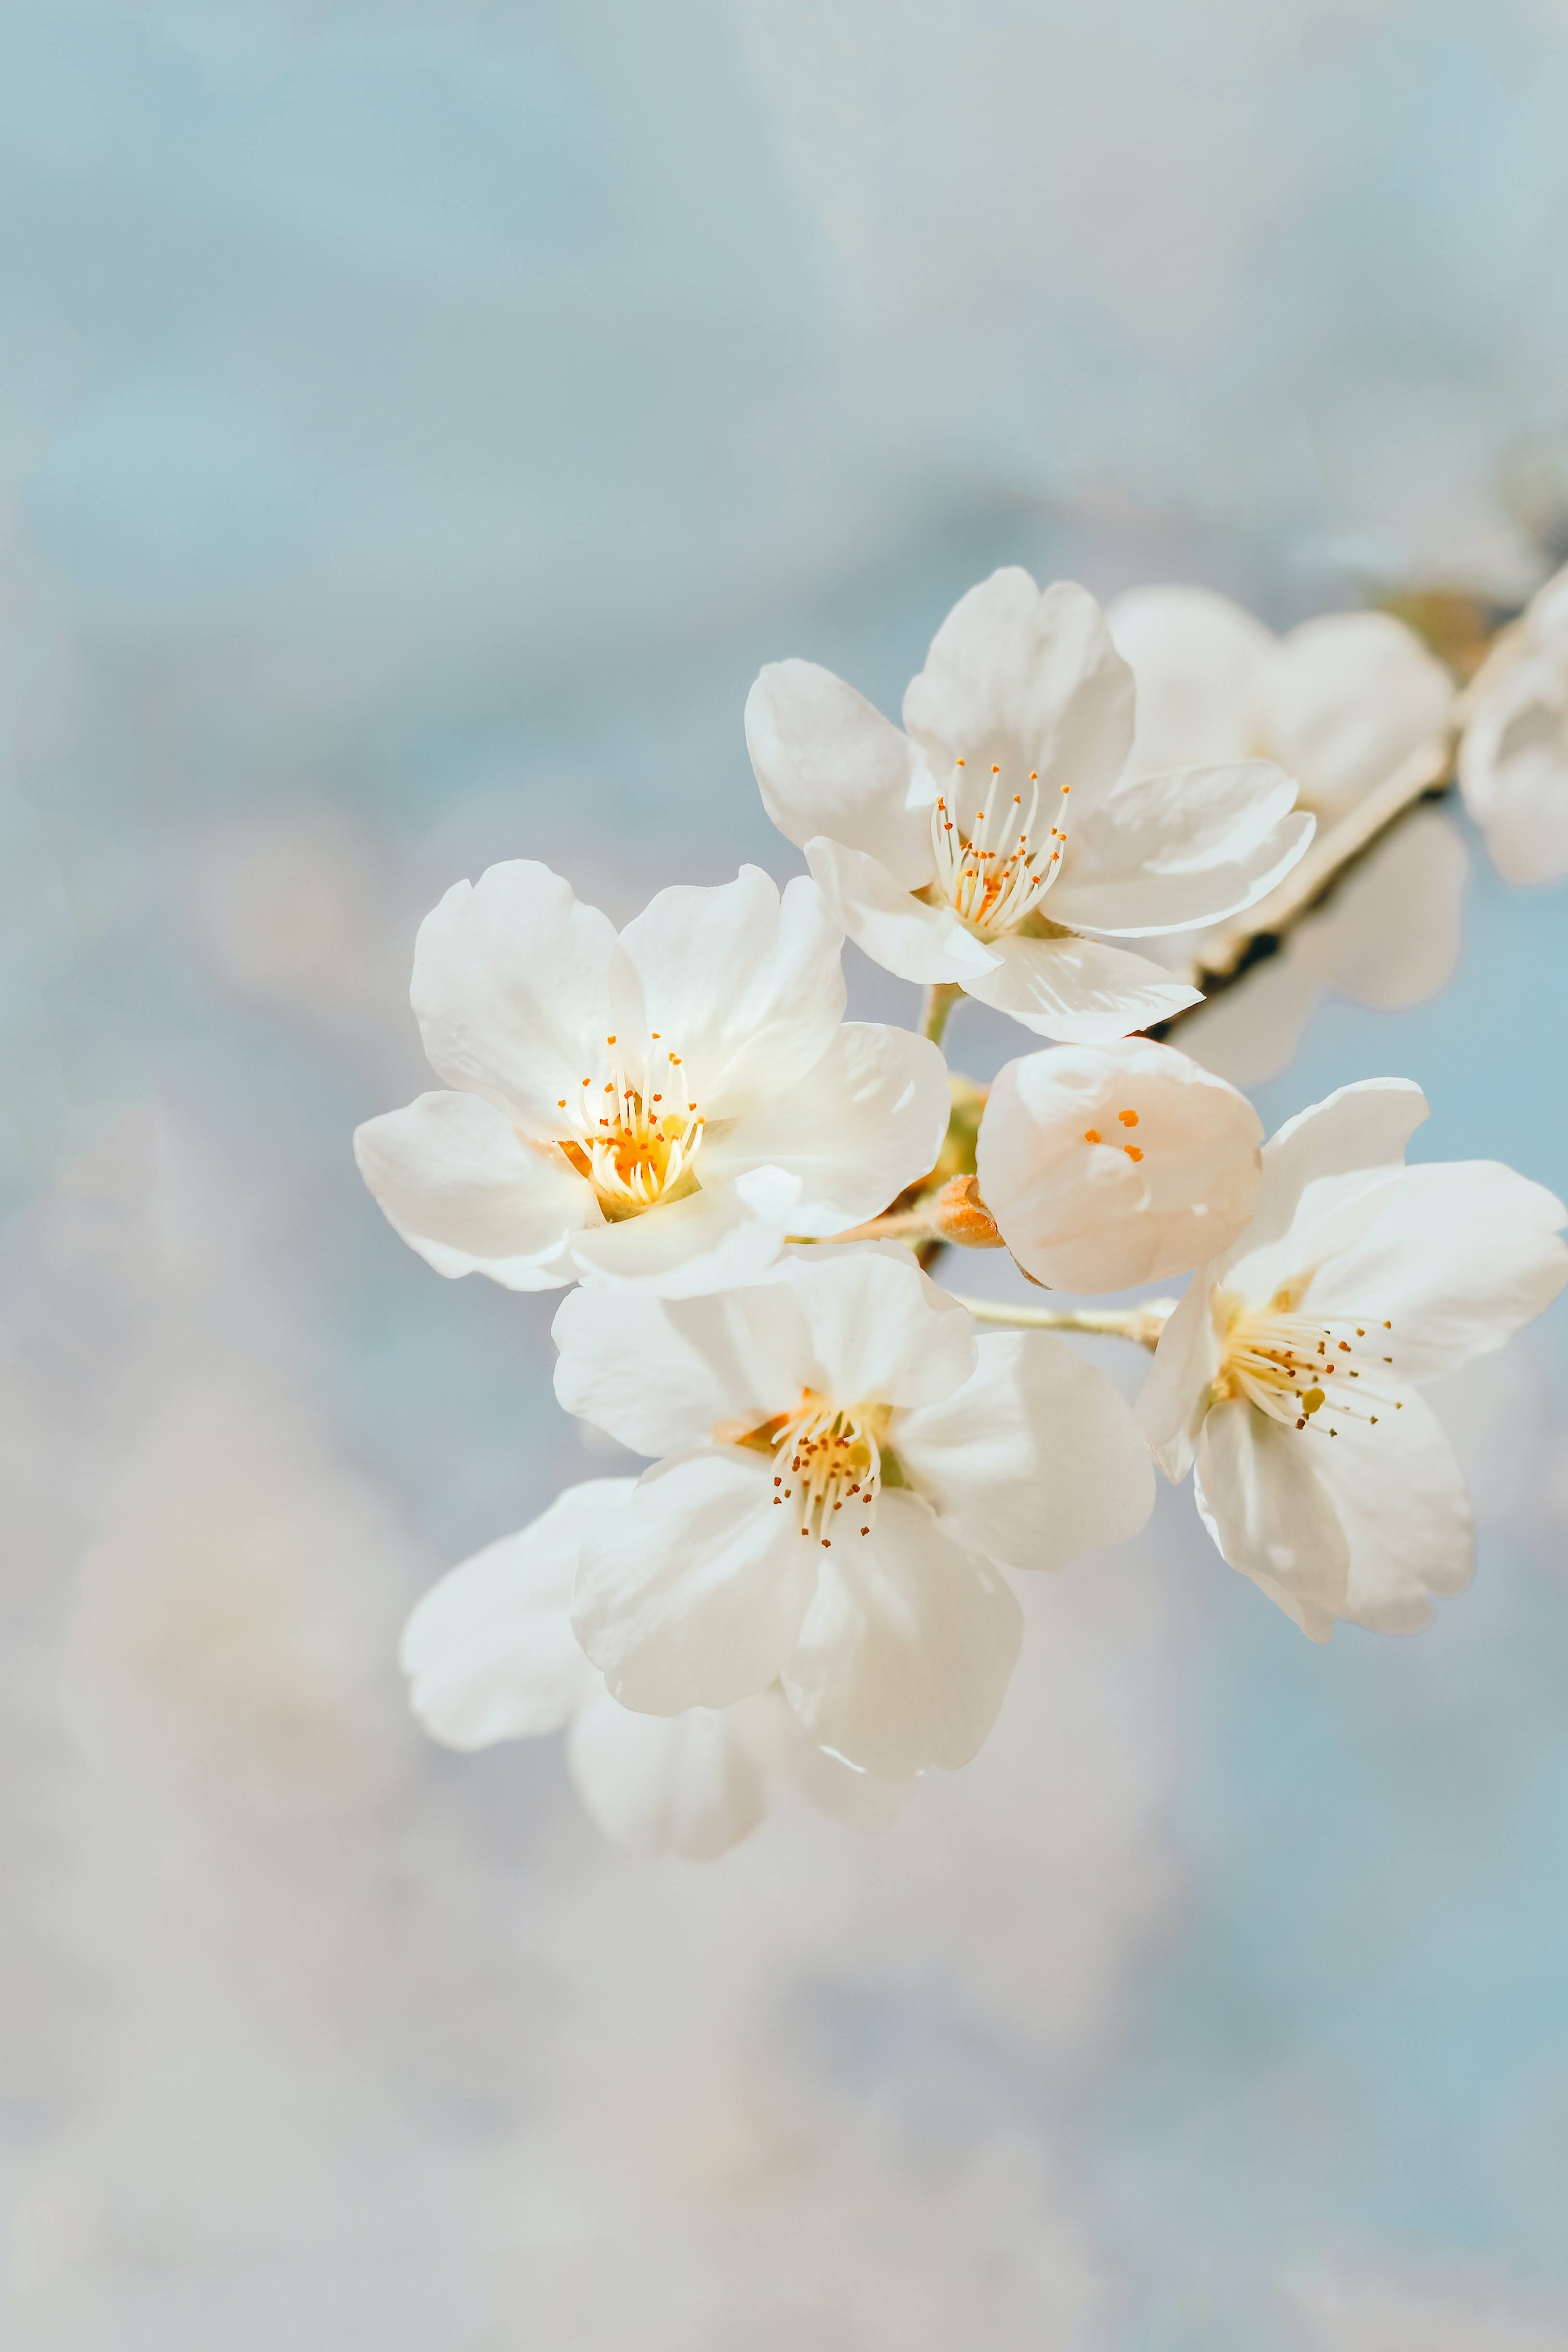 White Cherry Blossom in Close-Up Photography | Photo by J Lee via Unsplash